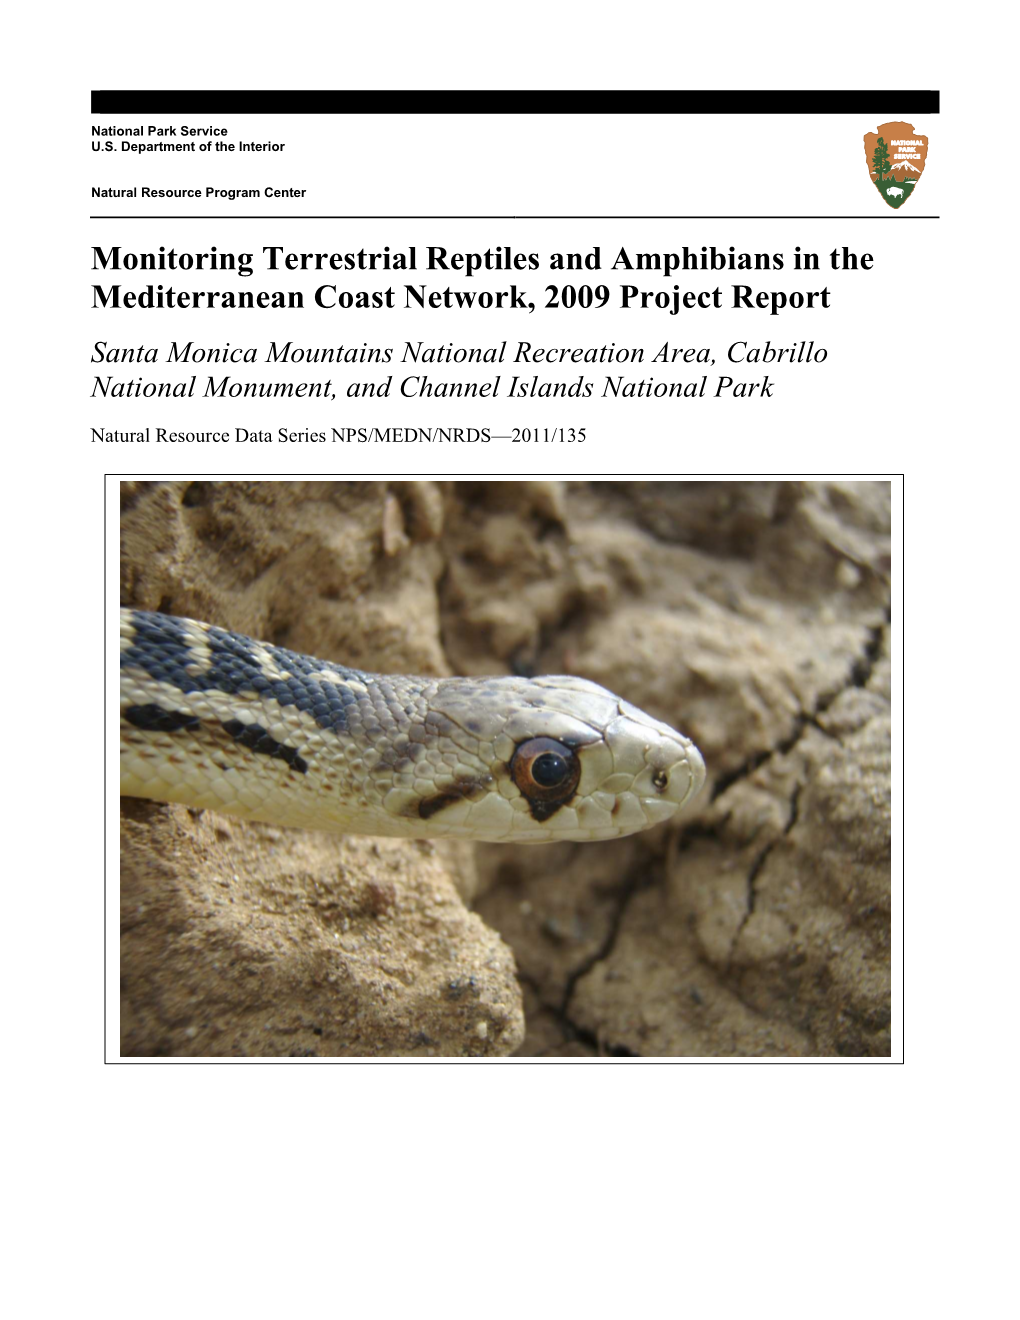 Monitoring Terrestrial Reptiles and Amphibians in the Mediterranean